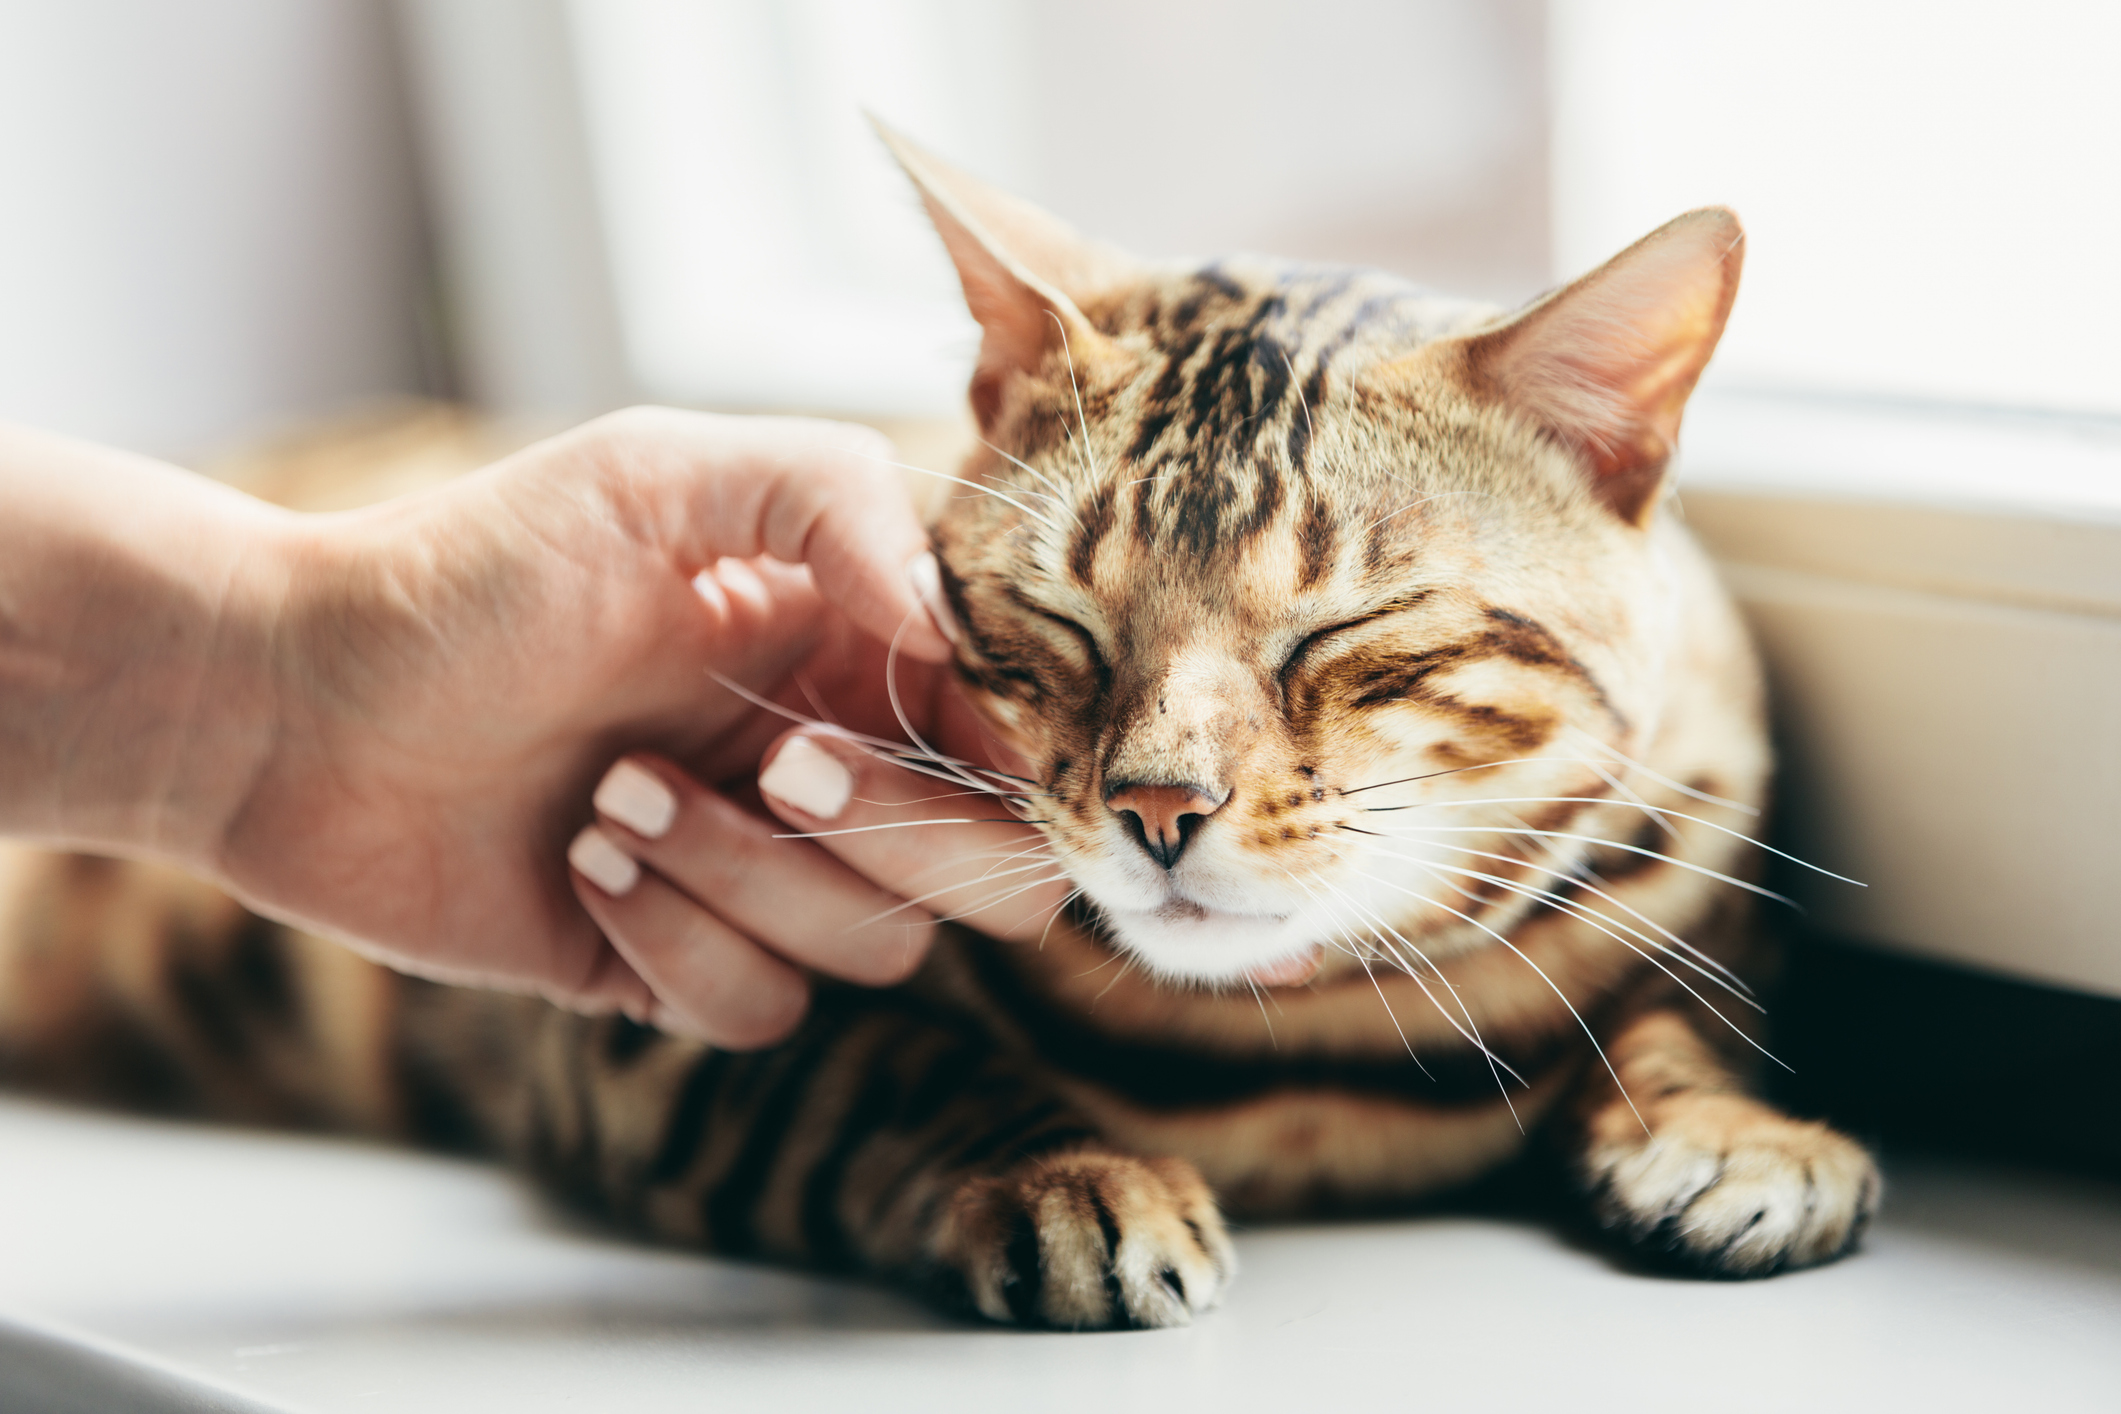 Why do cats purr?